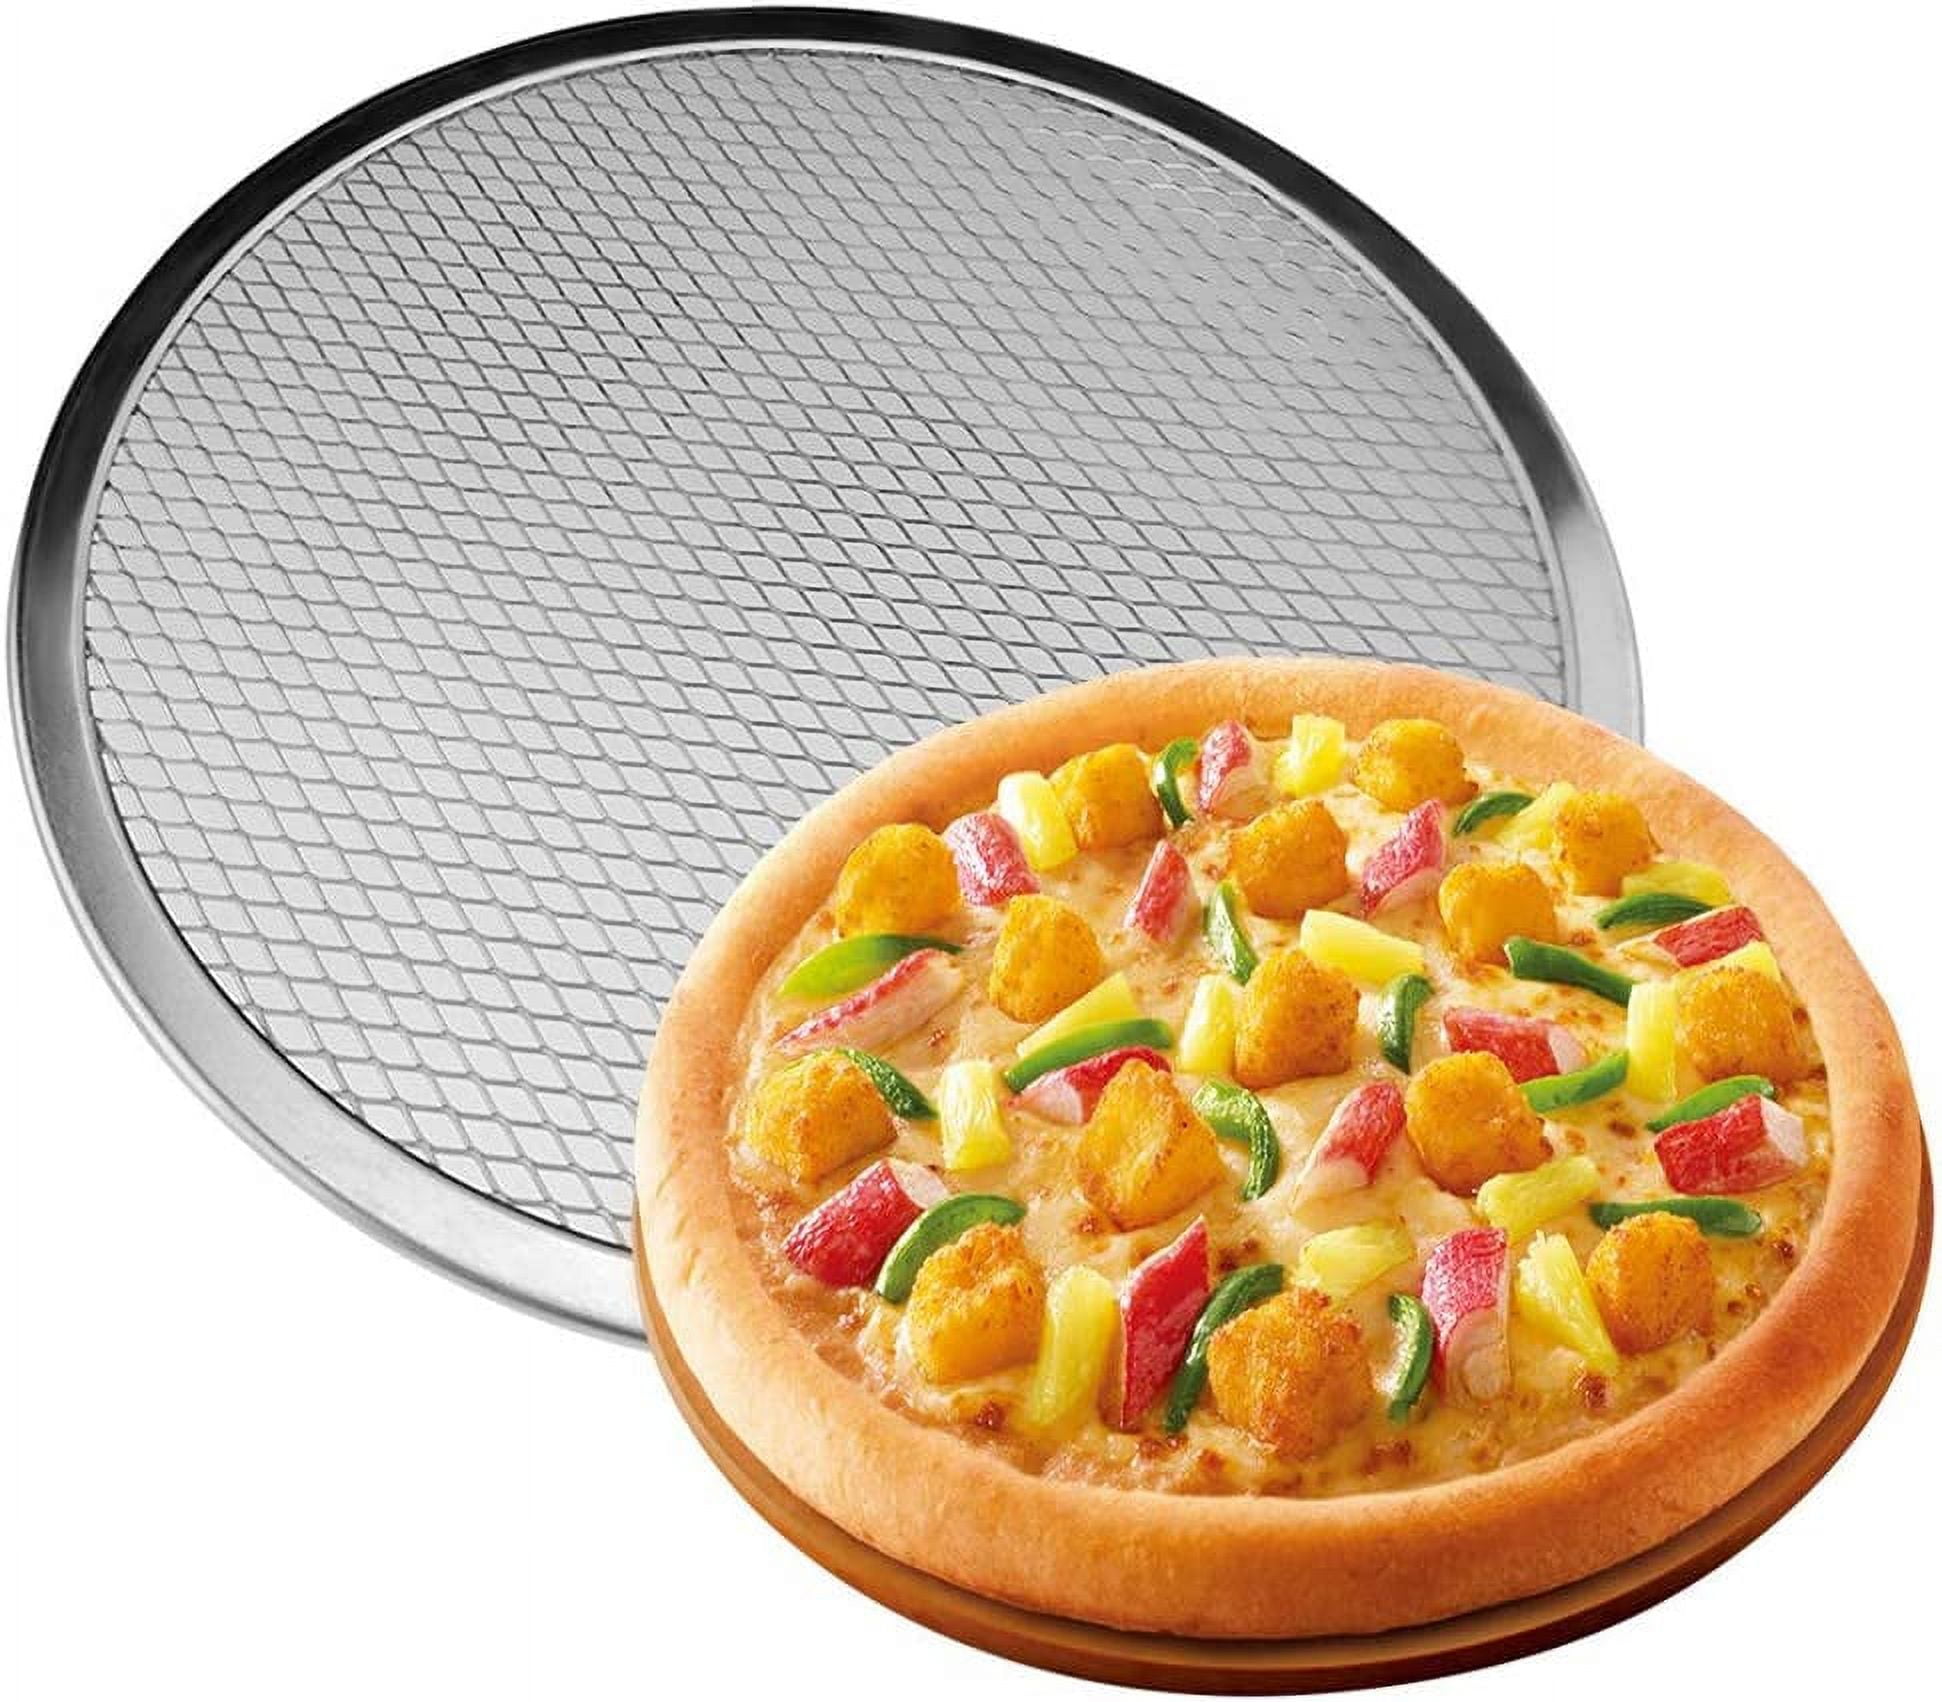 pizza screen rack 18 inch pizza screen 14 inch 20Inch baking pans